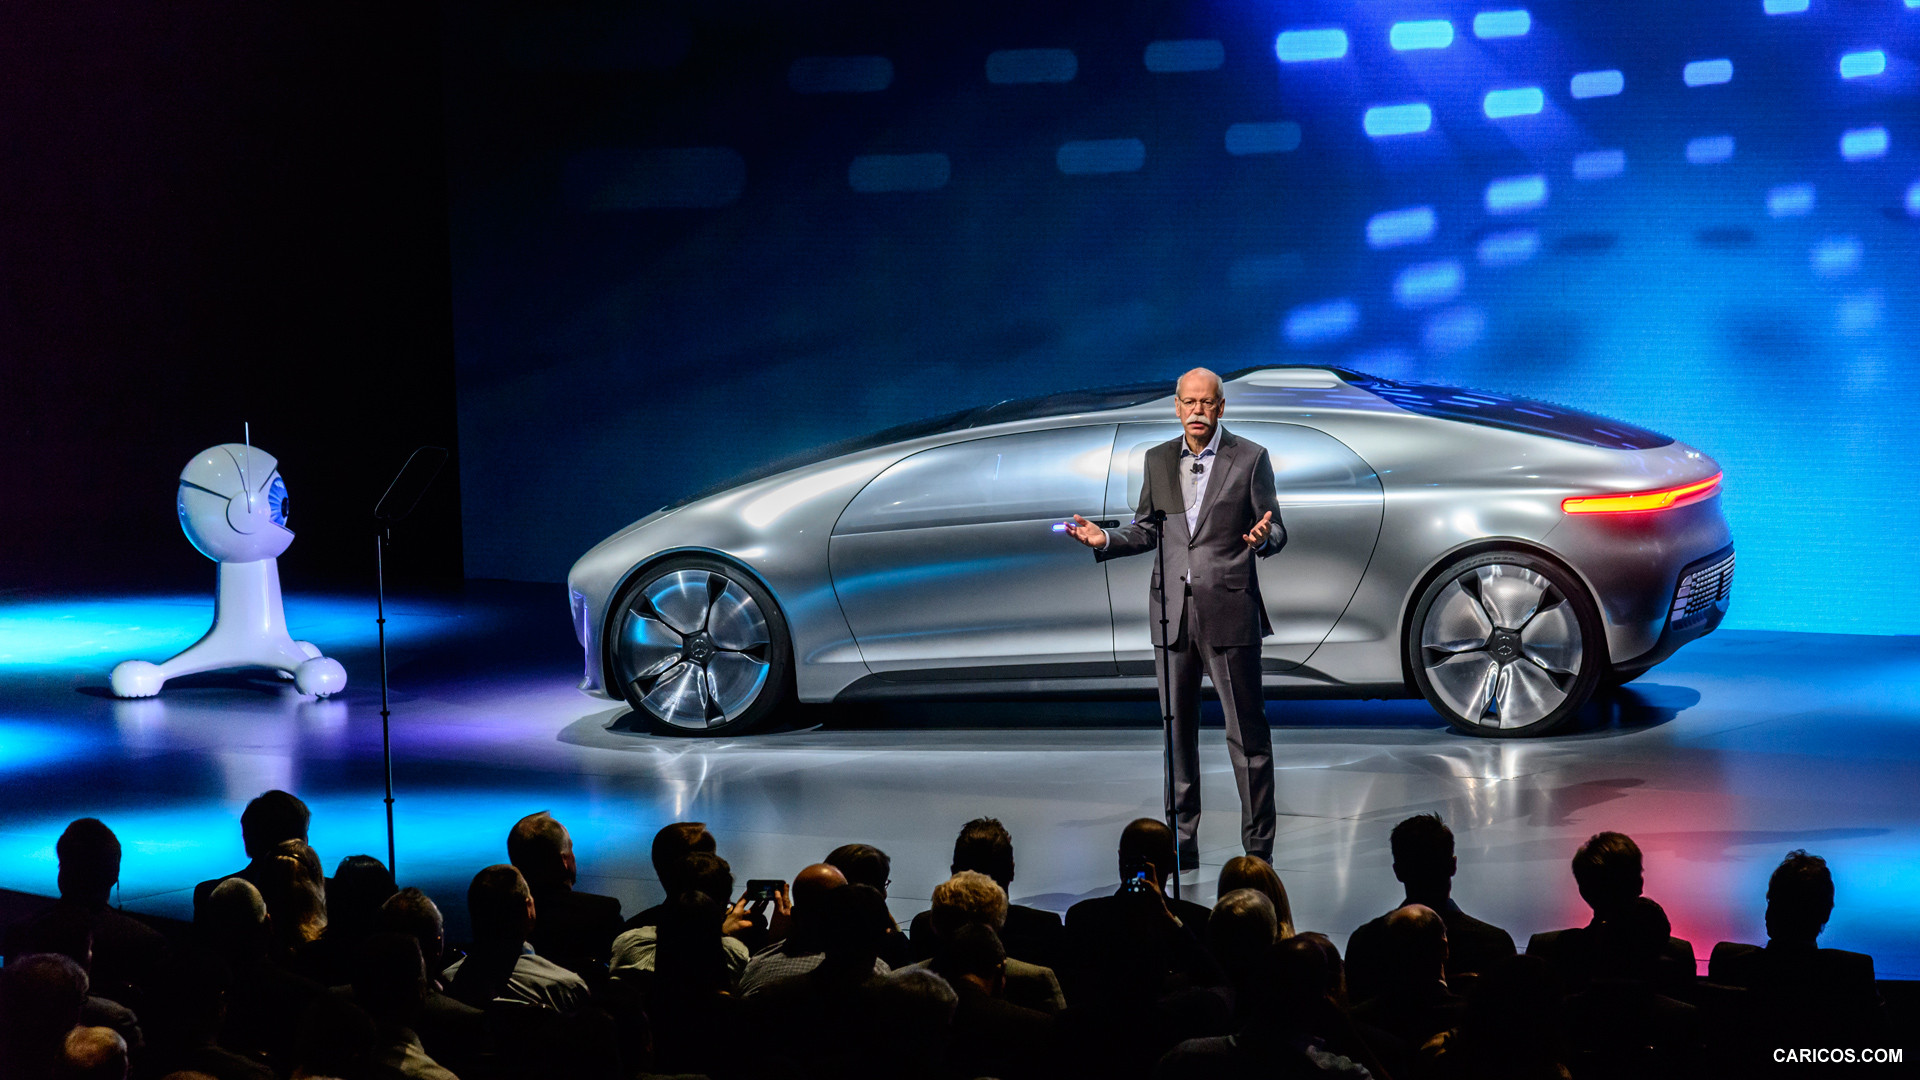 2015 Mercedes-Benz F 015 Luxury in Motion Concept at CES - Side, #89 of 92